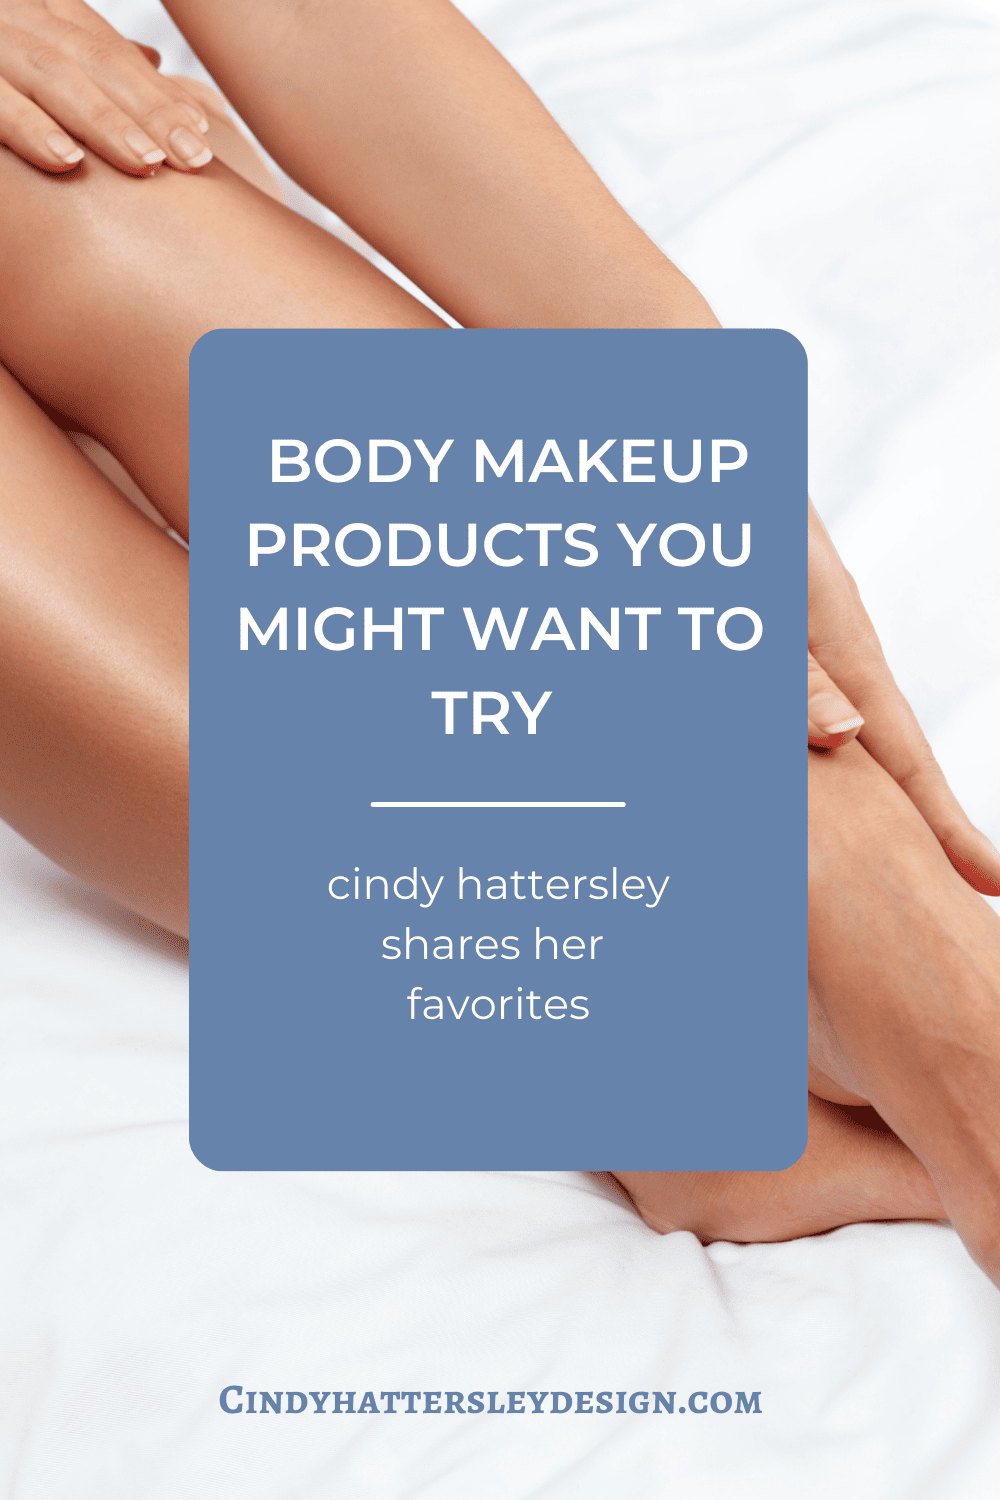 https://cindyhattersleydesign.com/wp-content/uploads/2023/04/body-makeup-products-you-should-try.png